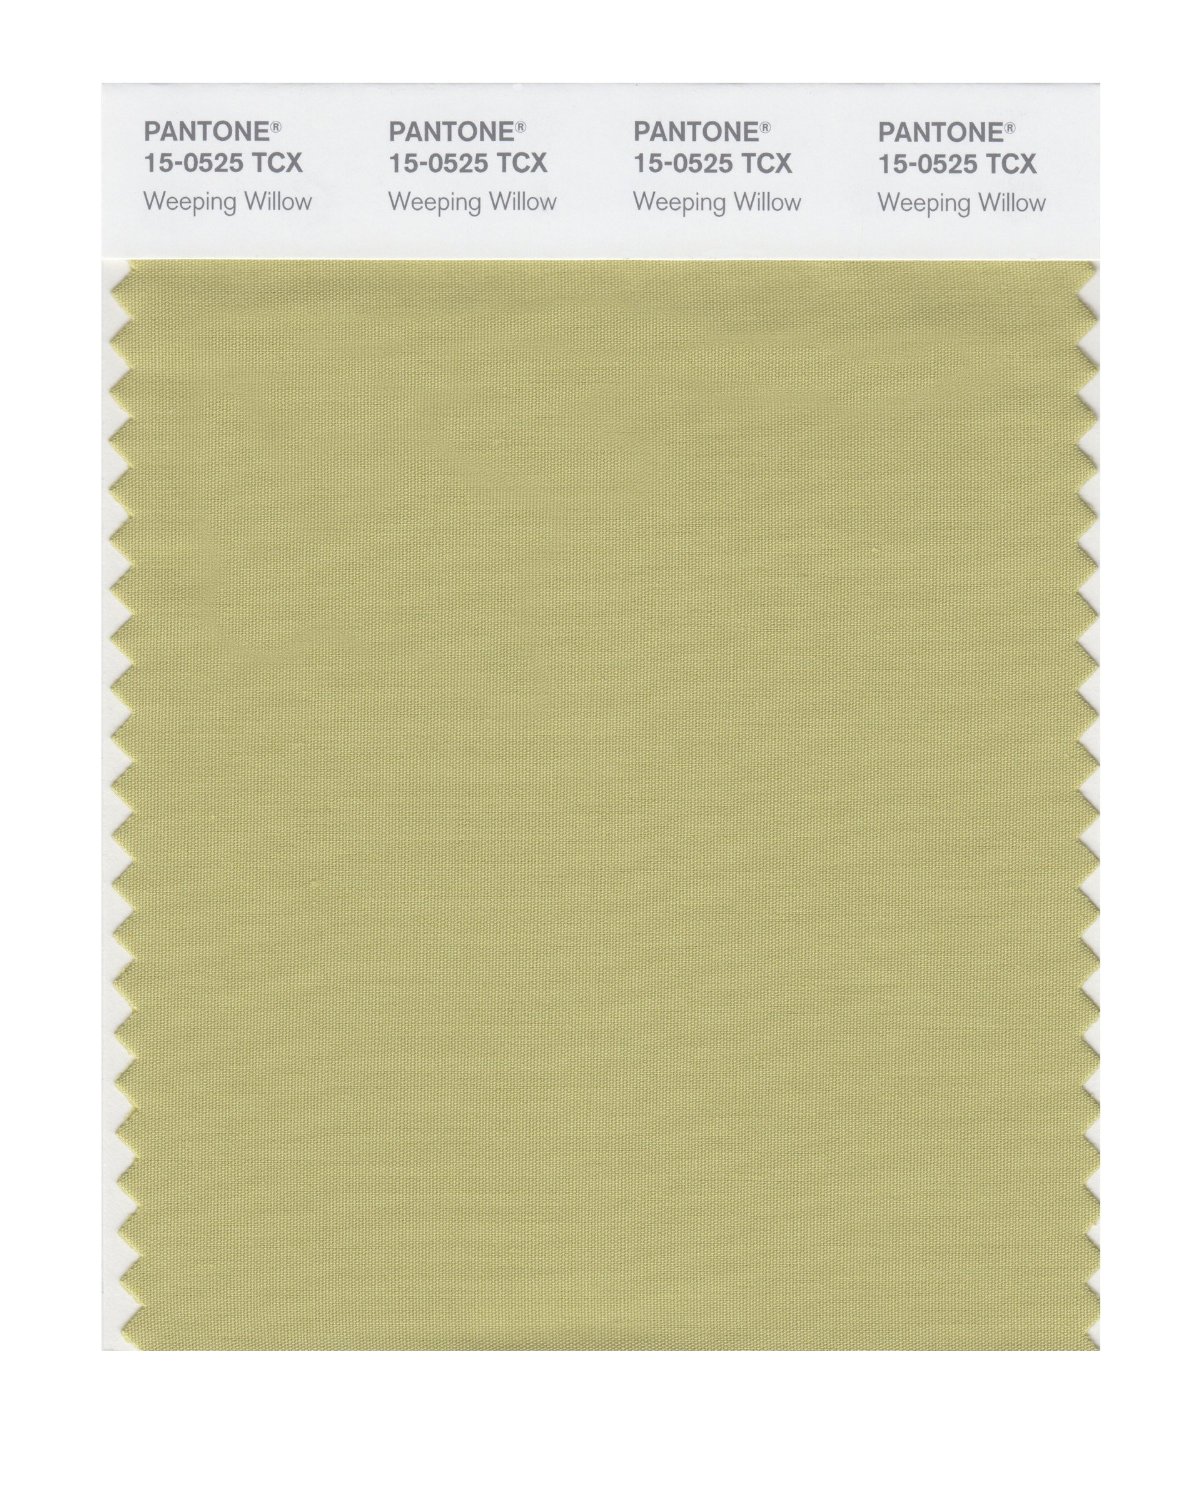 Pantone Cotton Swatch 15-0525 Weeping Willow